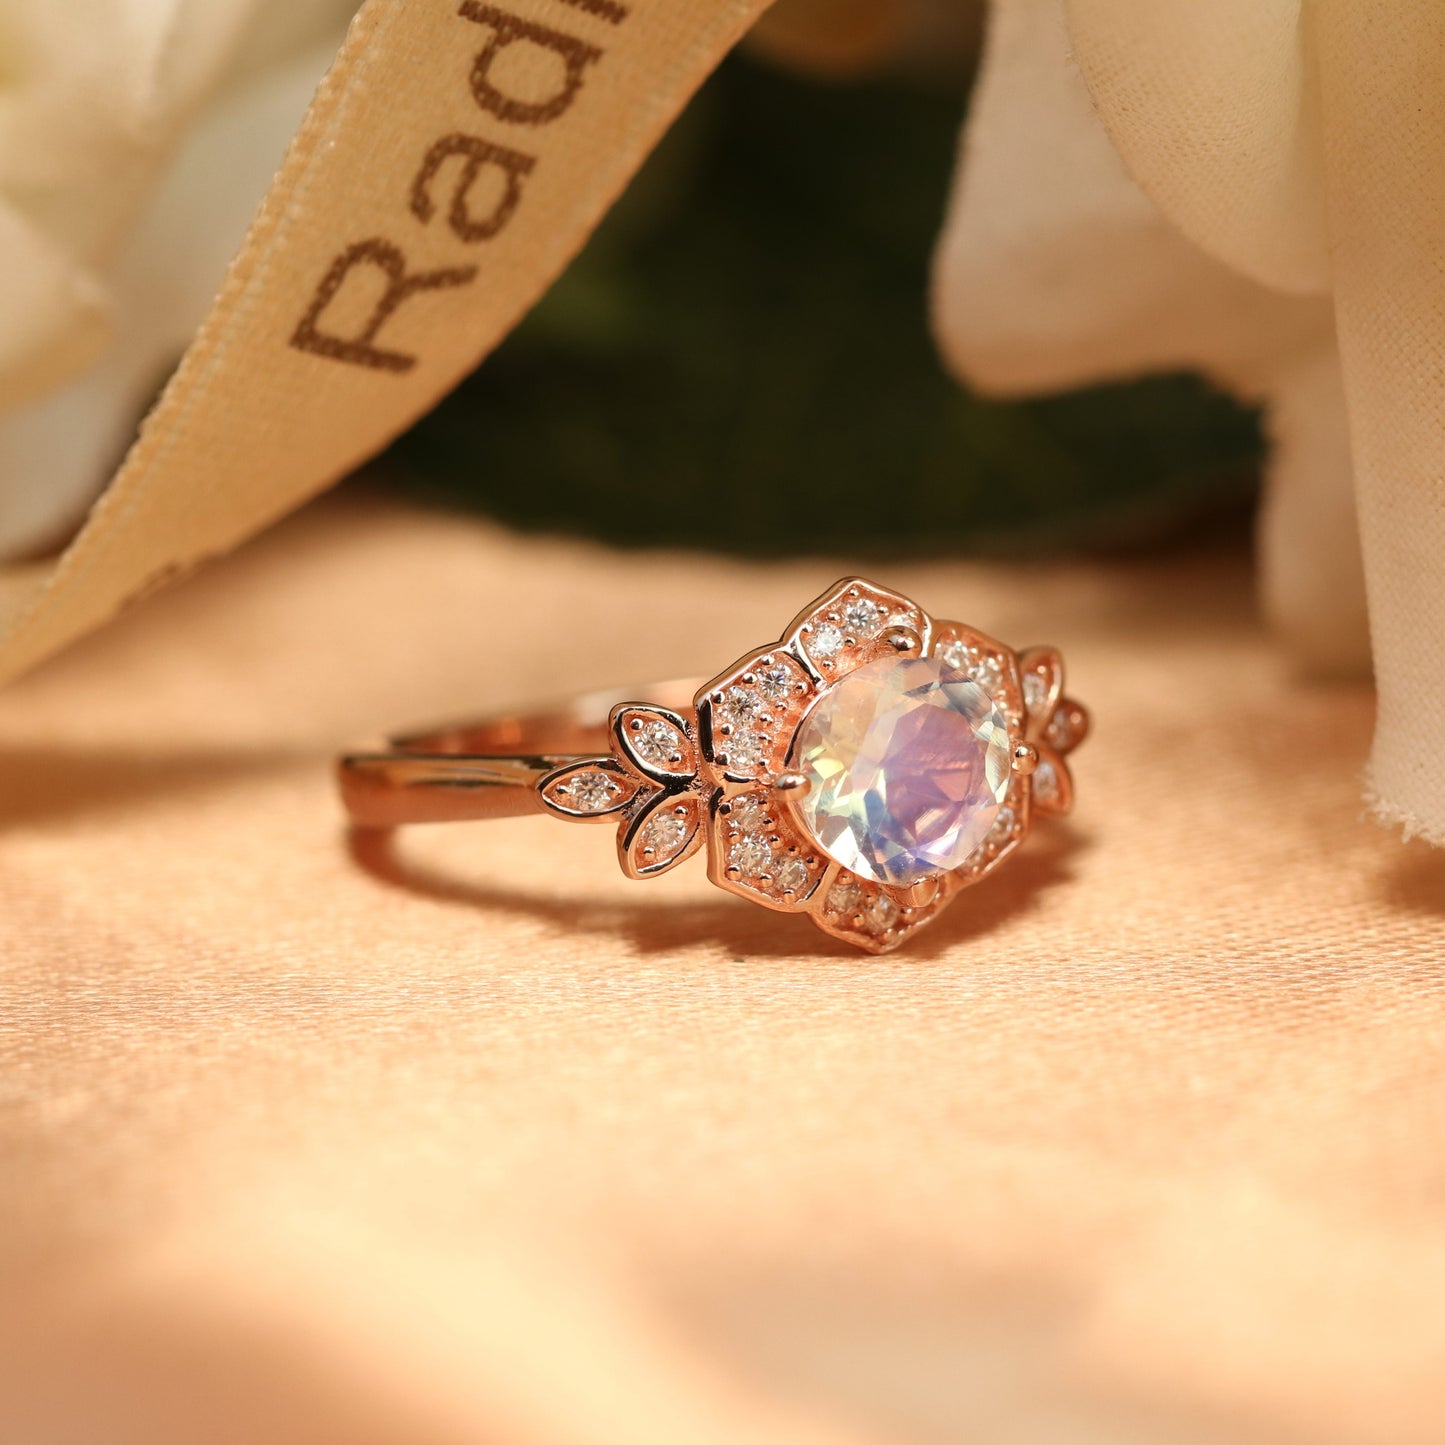 Flower Shape 1.25 carat Round Cut Moonstone Engagement Ring for Women in Rose Gold